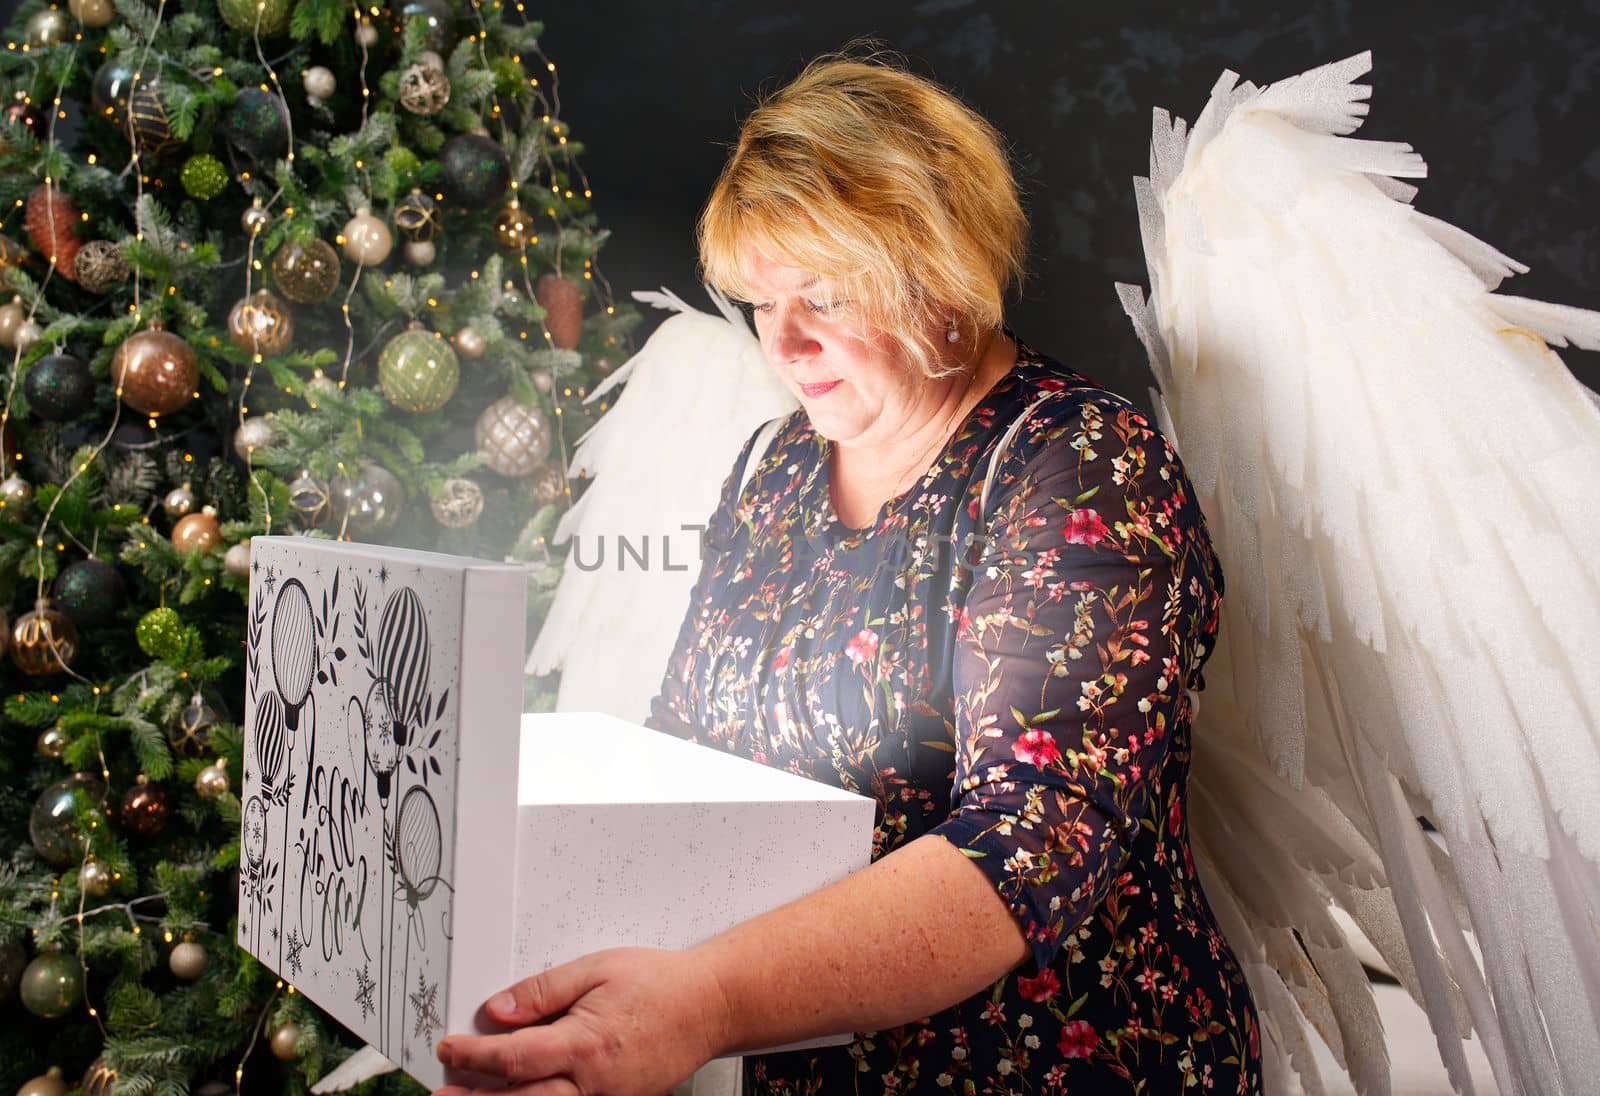 smiling lonely woman opens a christmas present near the christmas tree. Woman with angel wings, Christmas wonder.